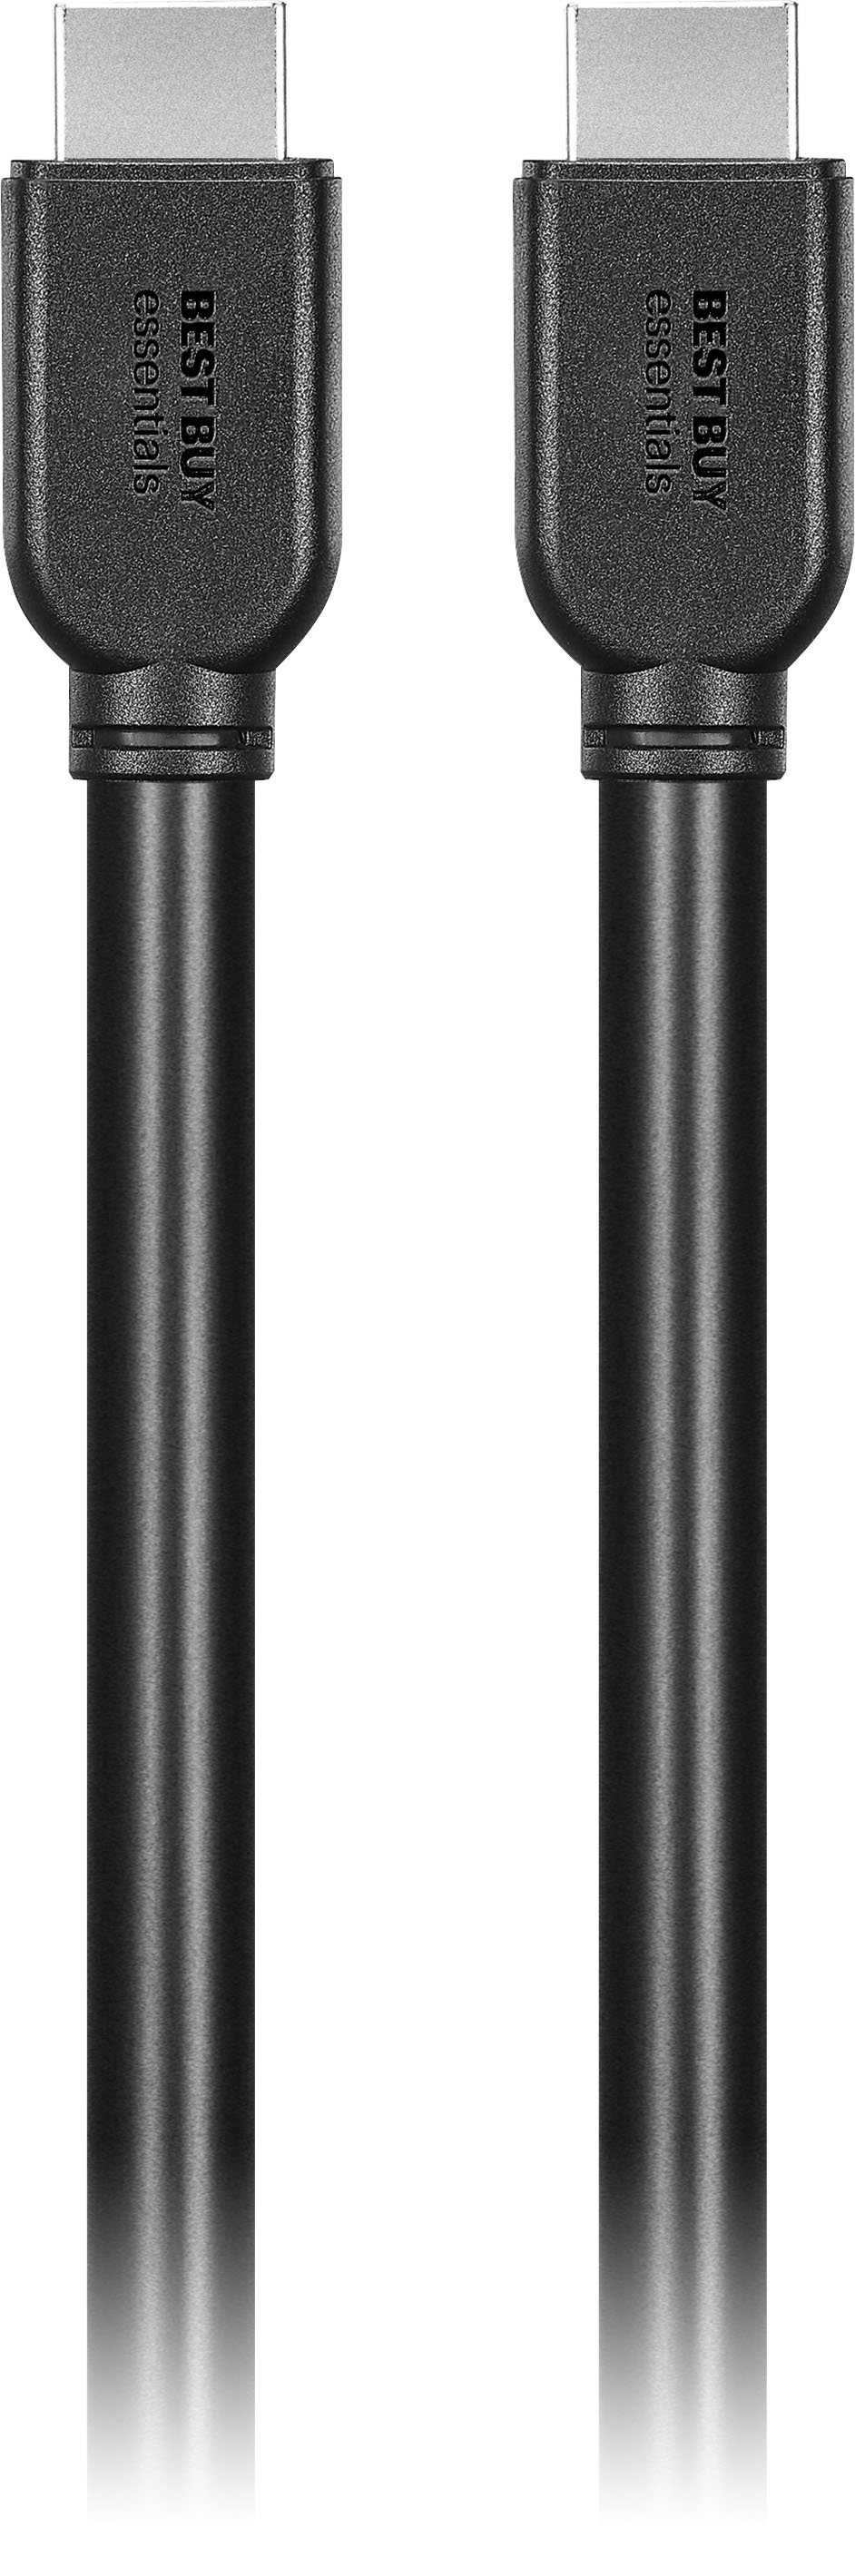 Best Buy essentials™ - 25' 4K Ultra HD In-Wall HDMI Cable - Black